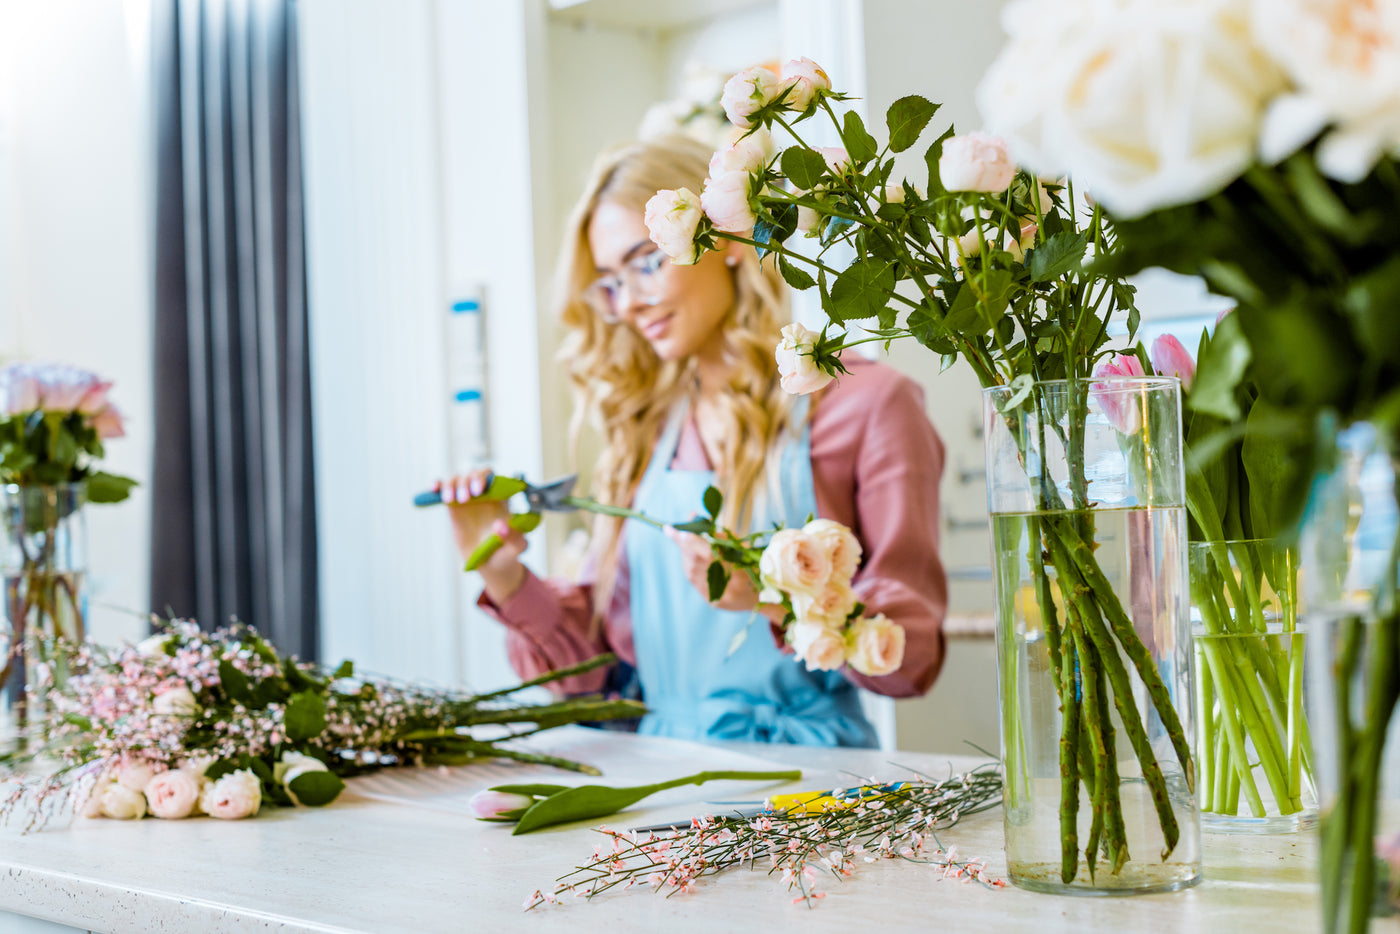 What To Look For in a West Hollywood Florist